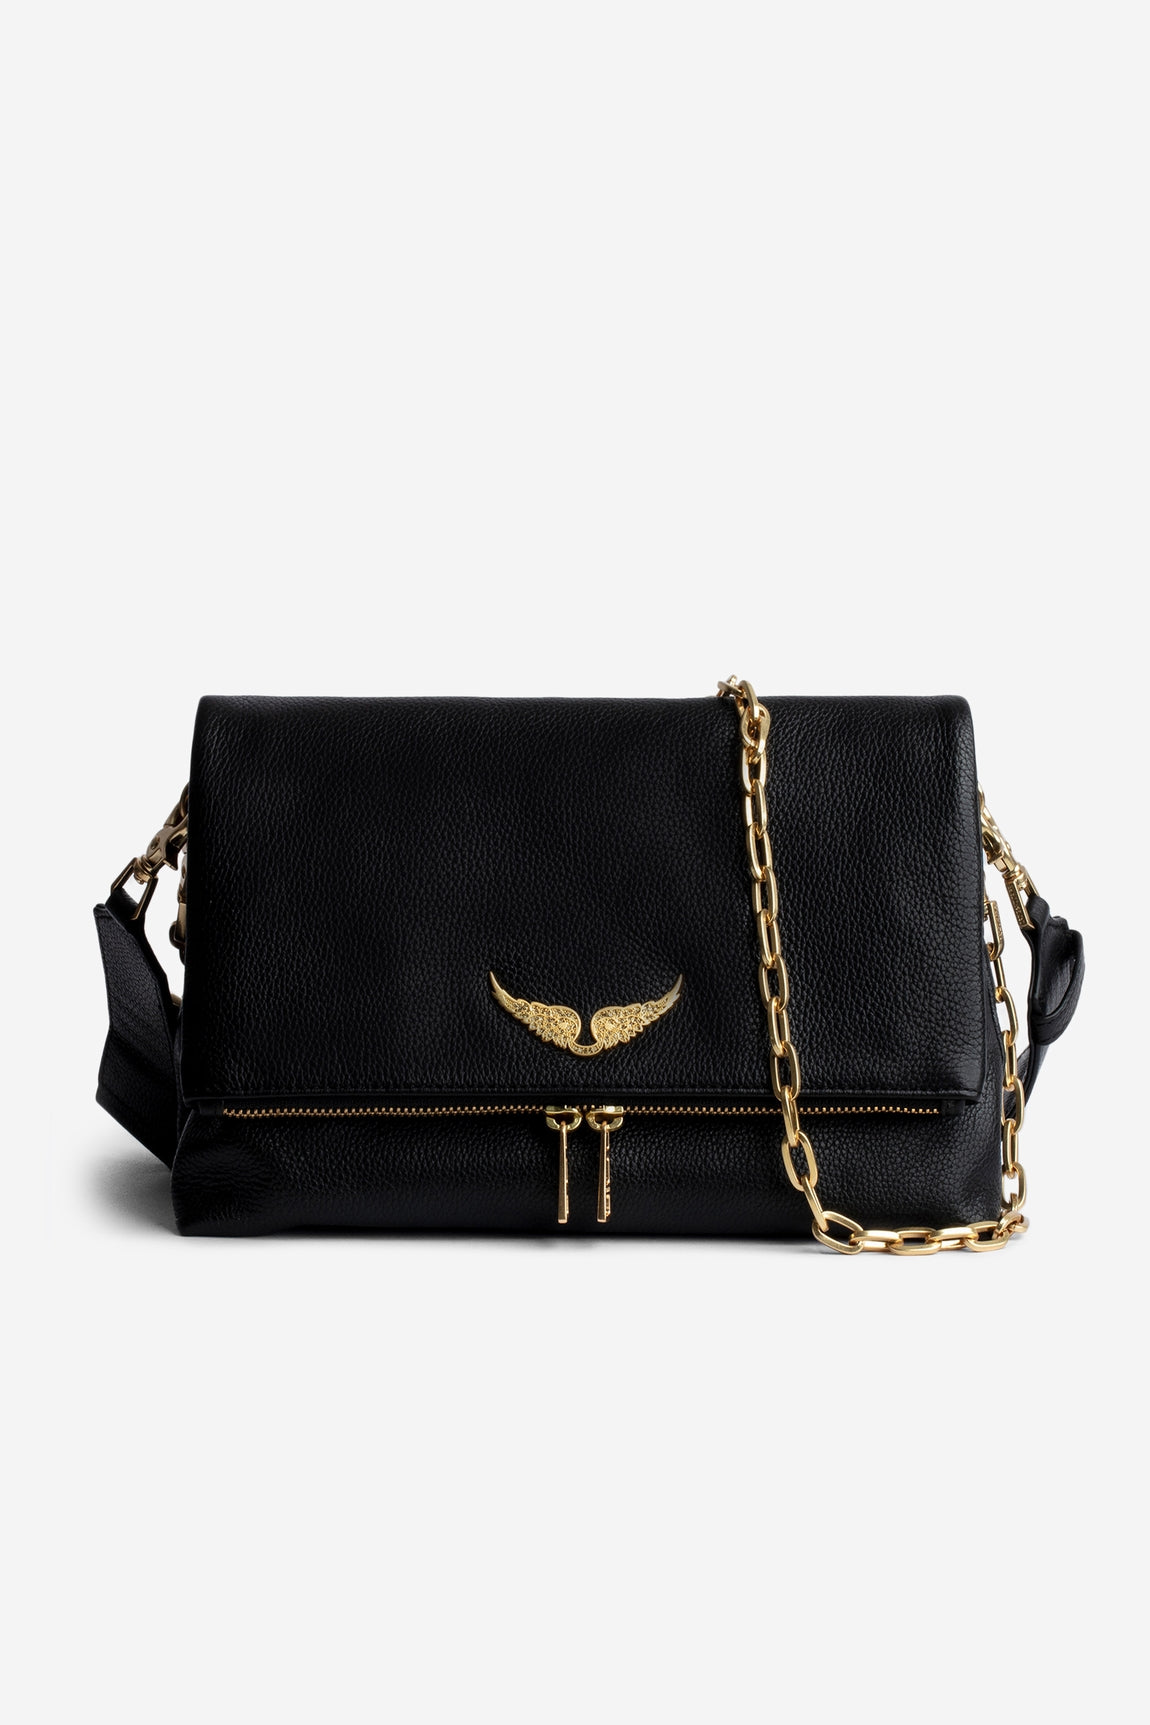 ROCKY GRAINED LEATHER bag, black/gold